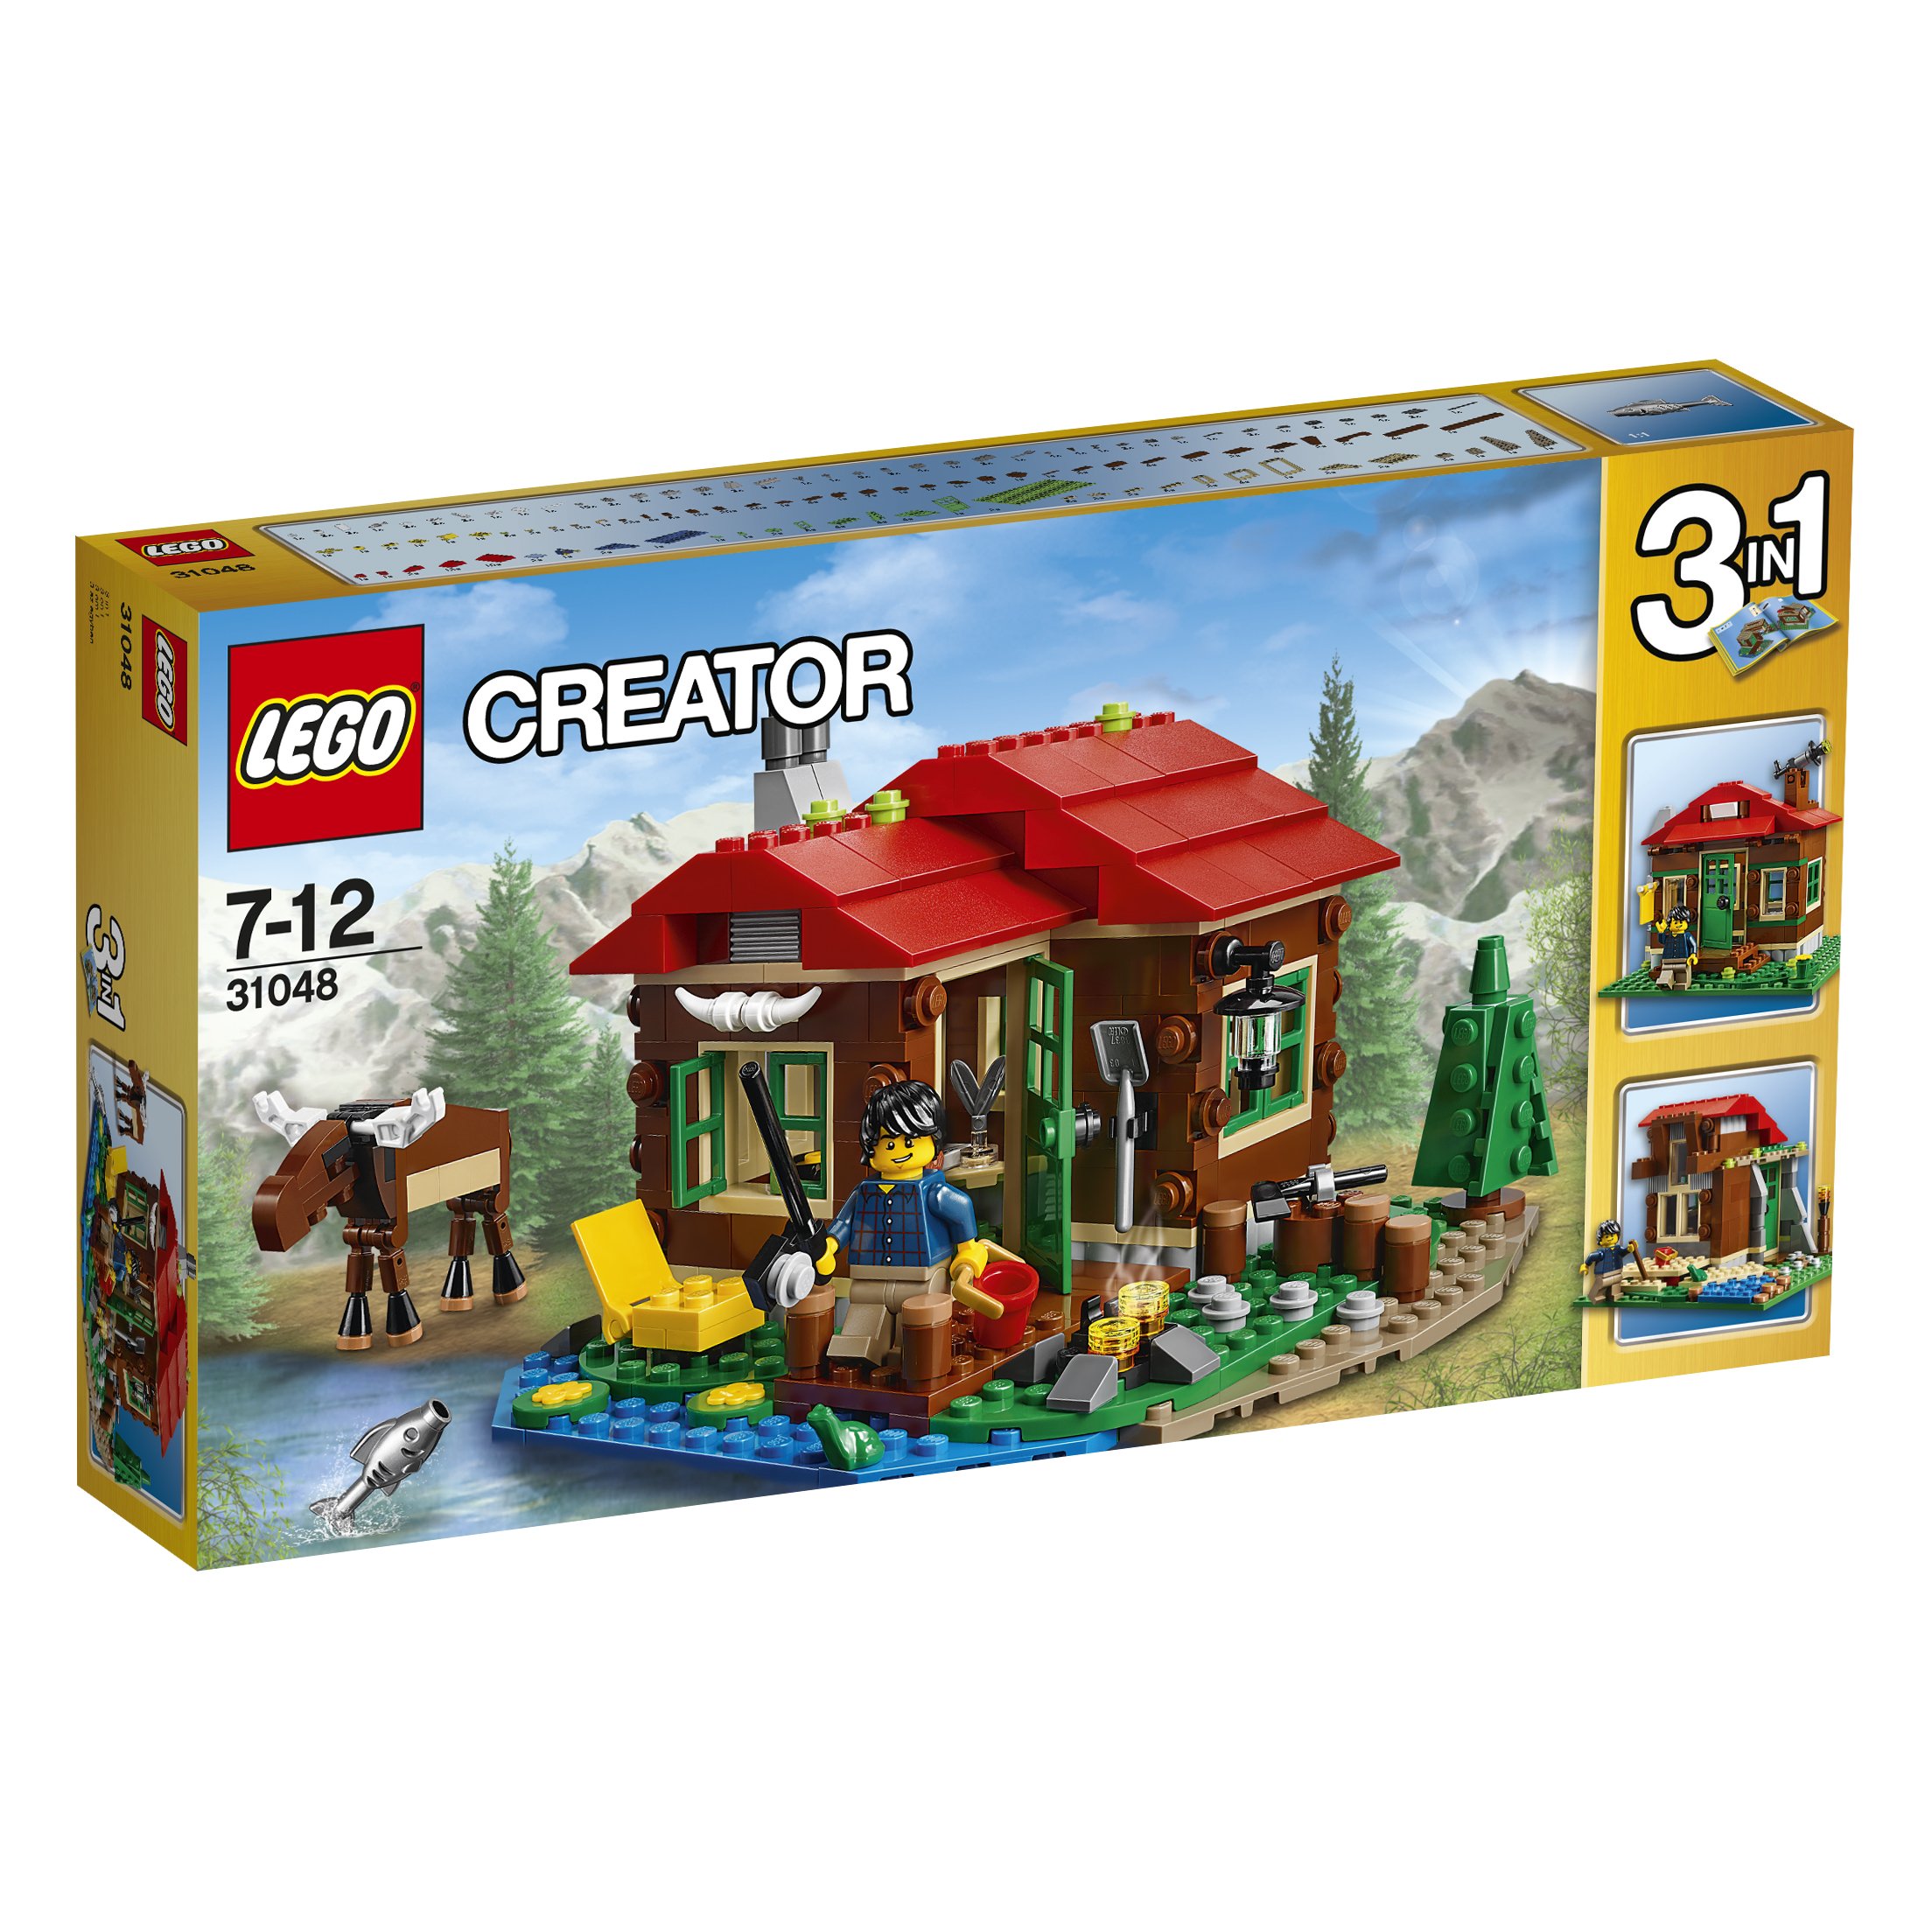 Lego Creator Hut At The Lake Building Block Toy